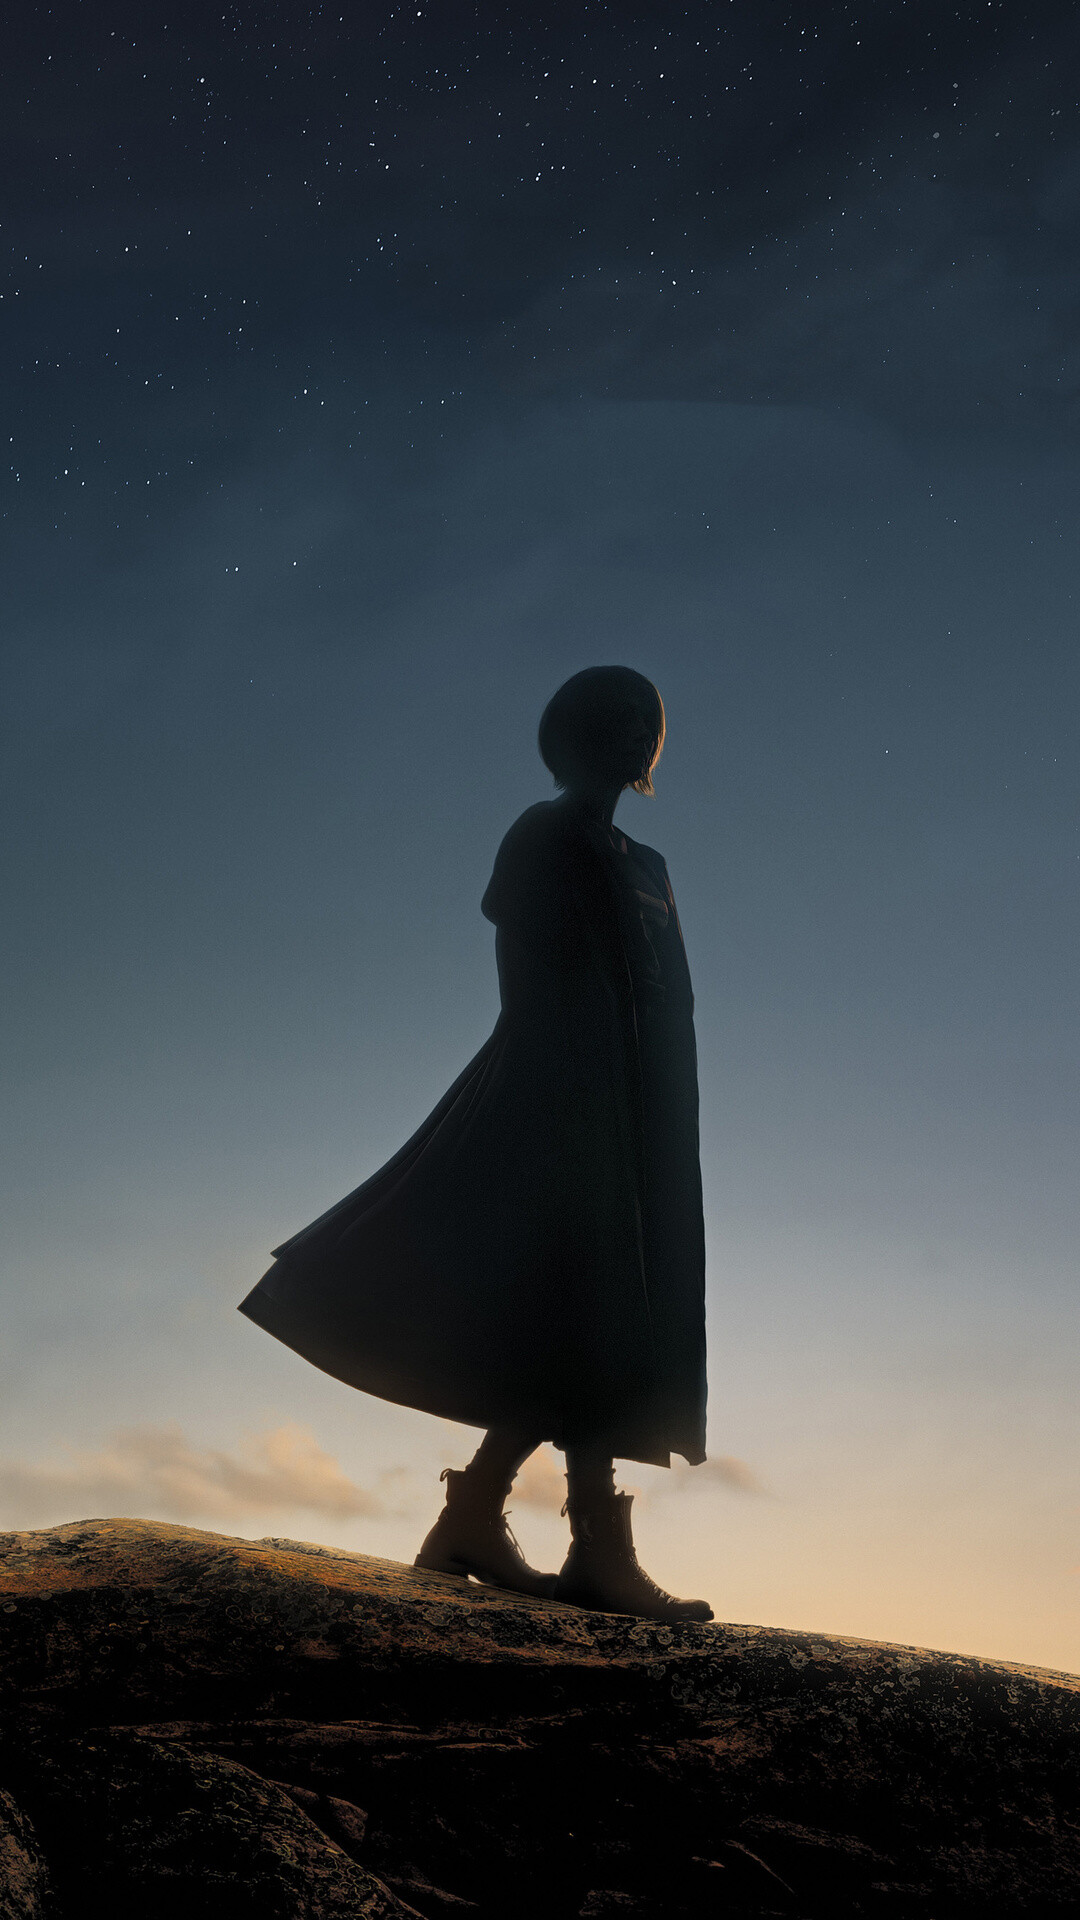 Doctor Who: Episode 1, Series 11, The Woman Who Fell to Earth. 1080x1920 Full HD Wallpaper.